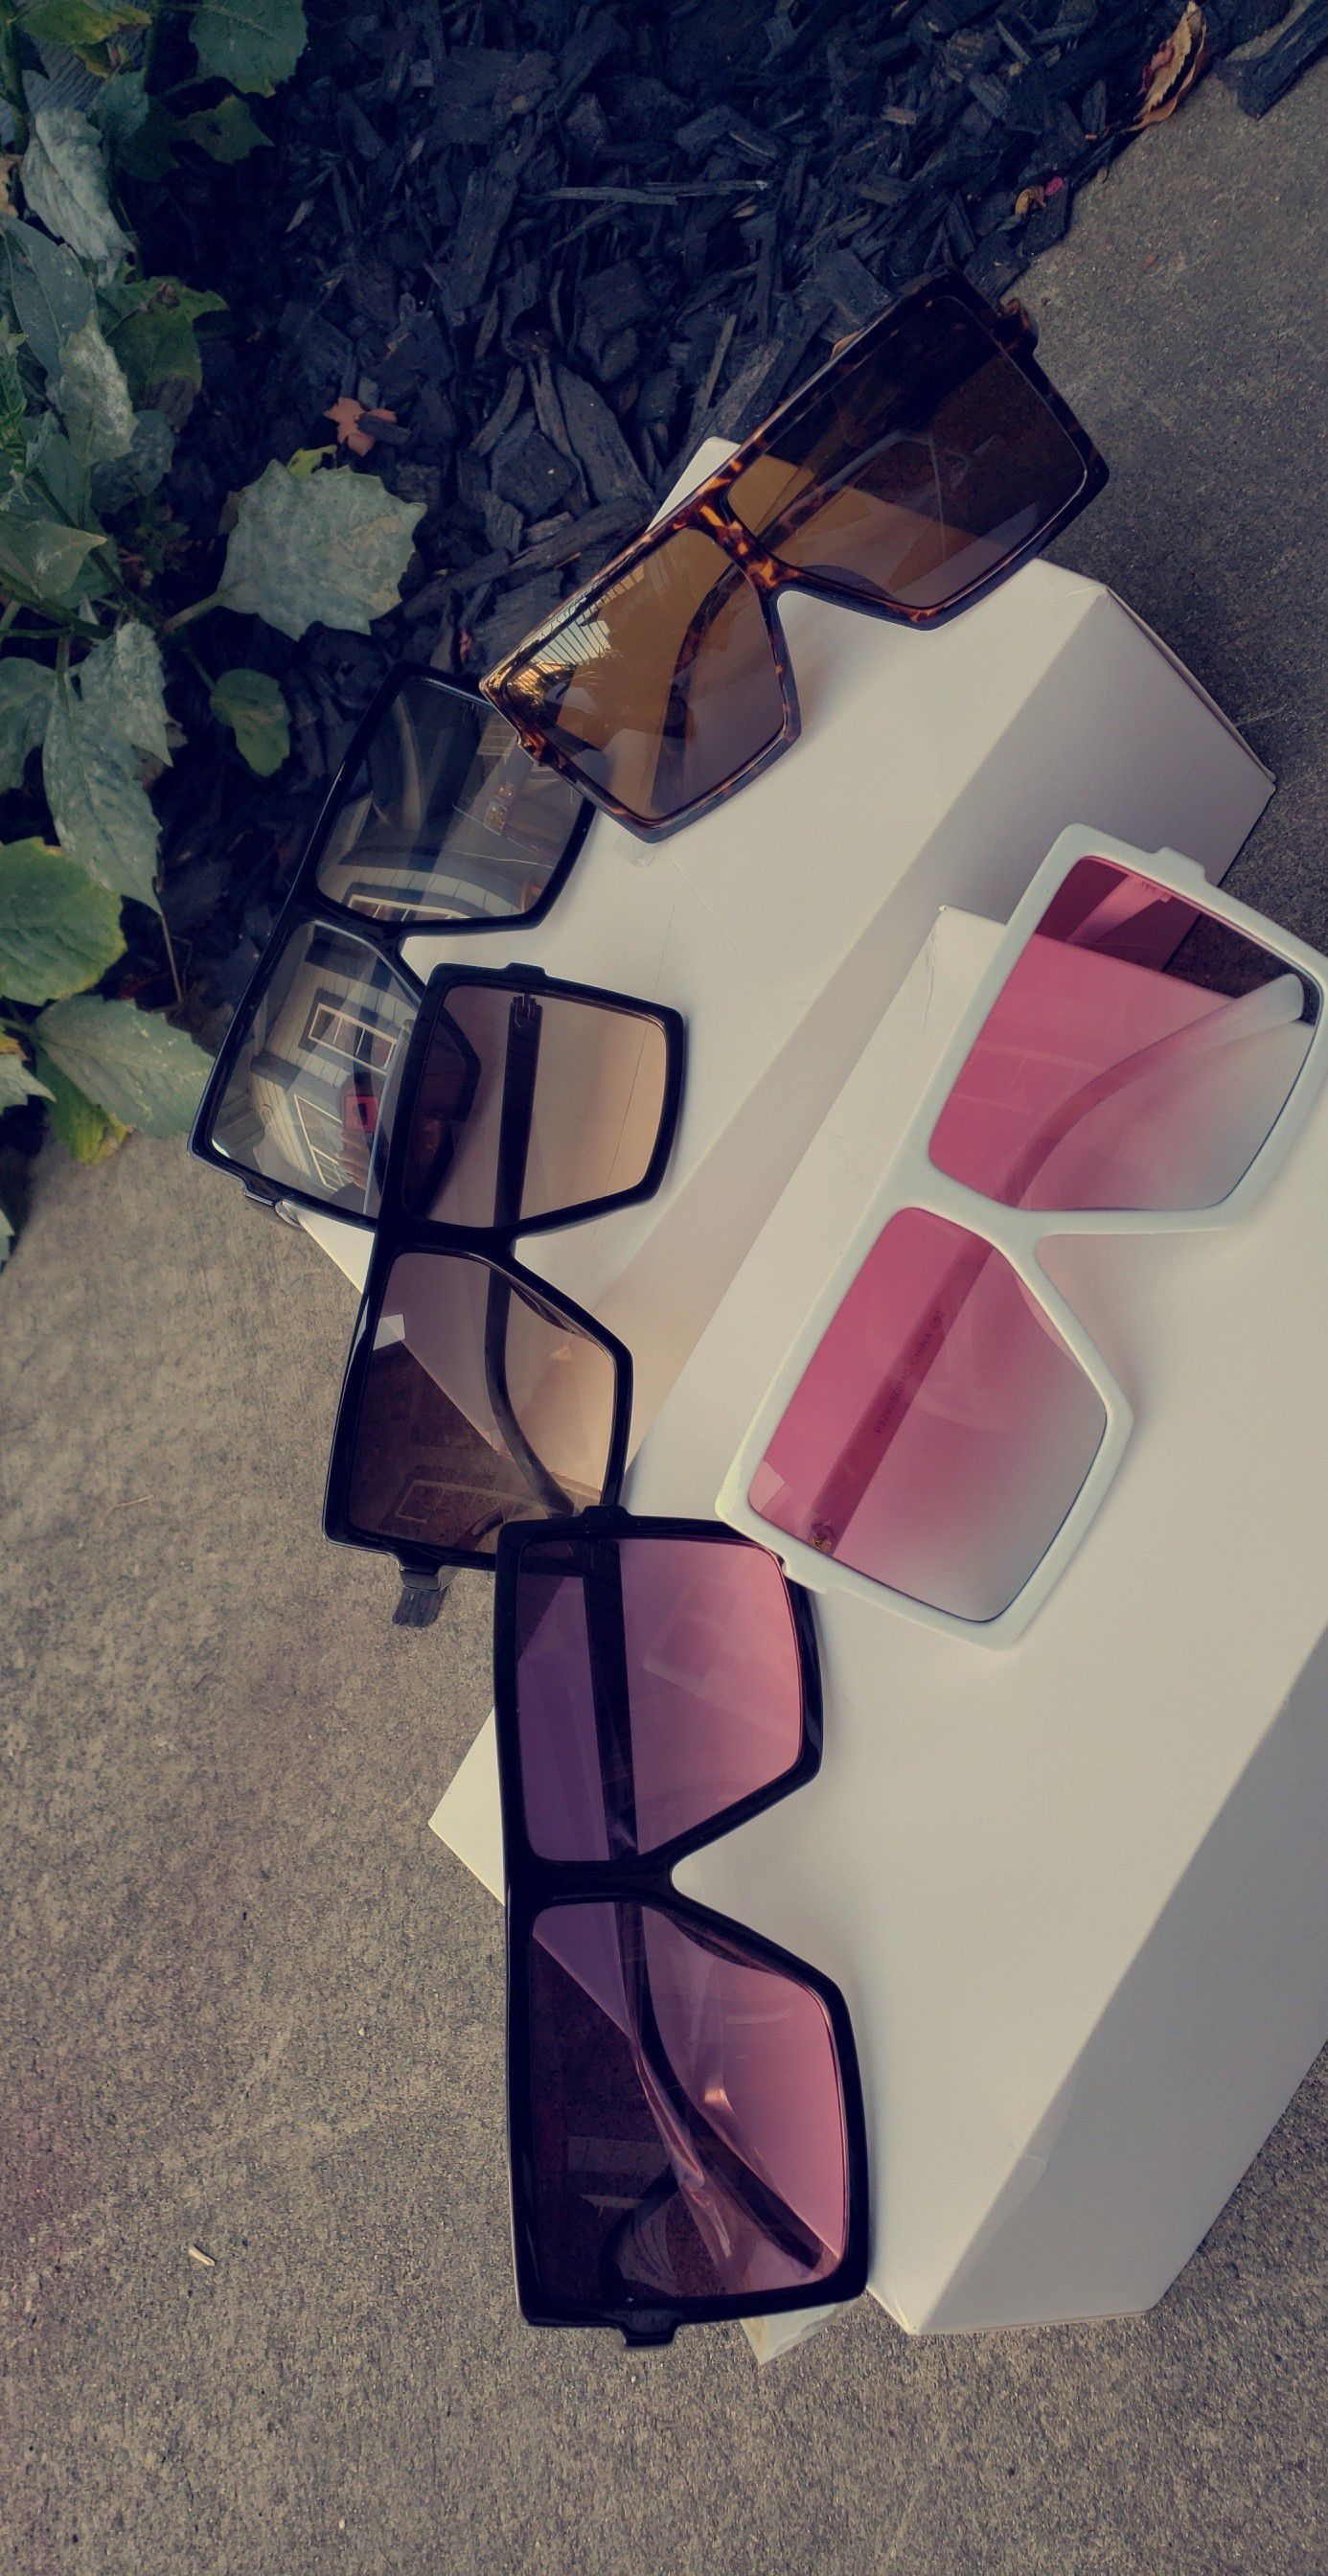 Sweetie shades